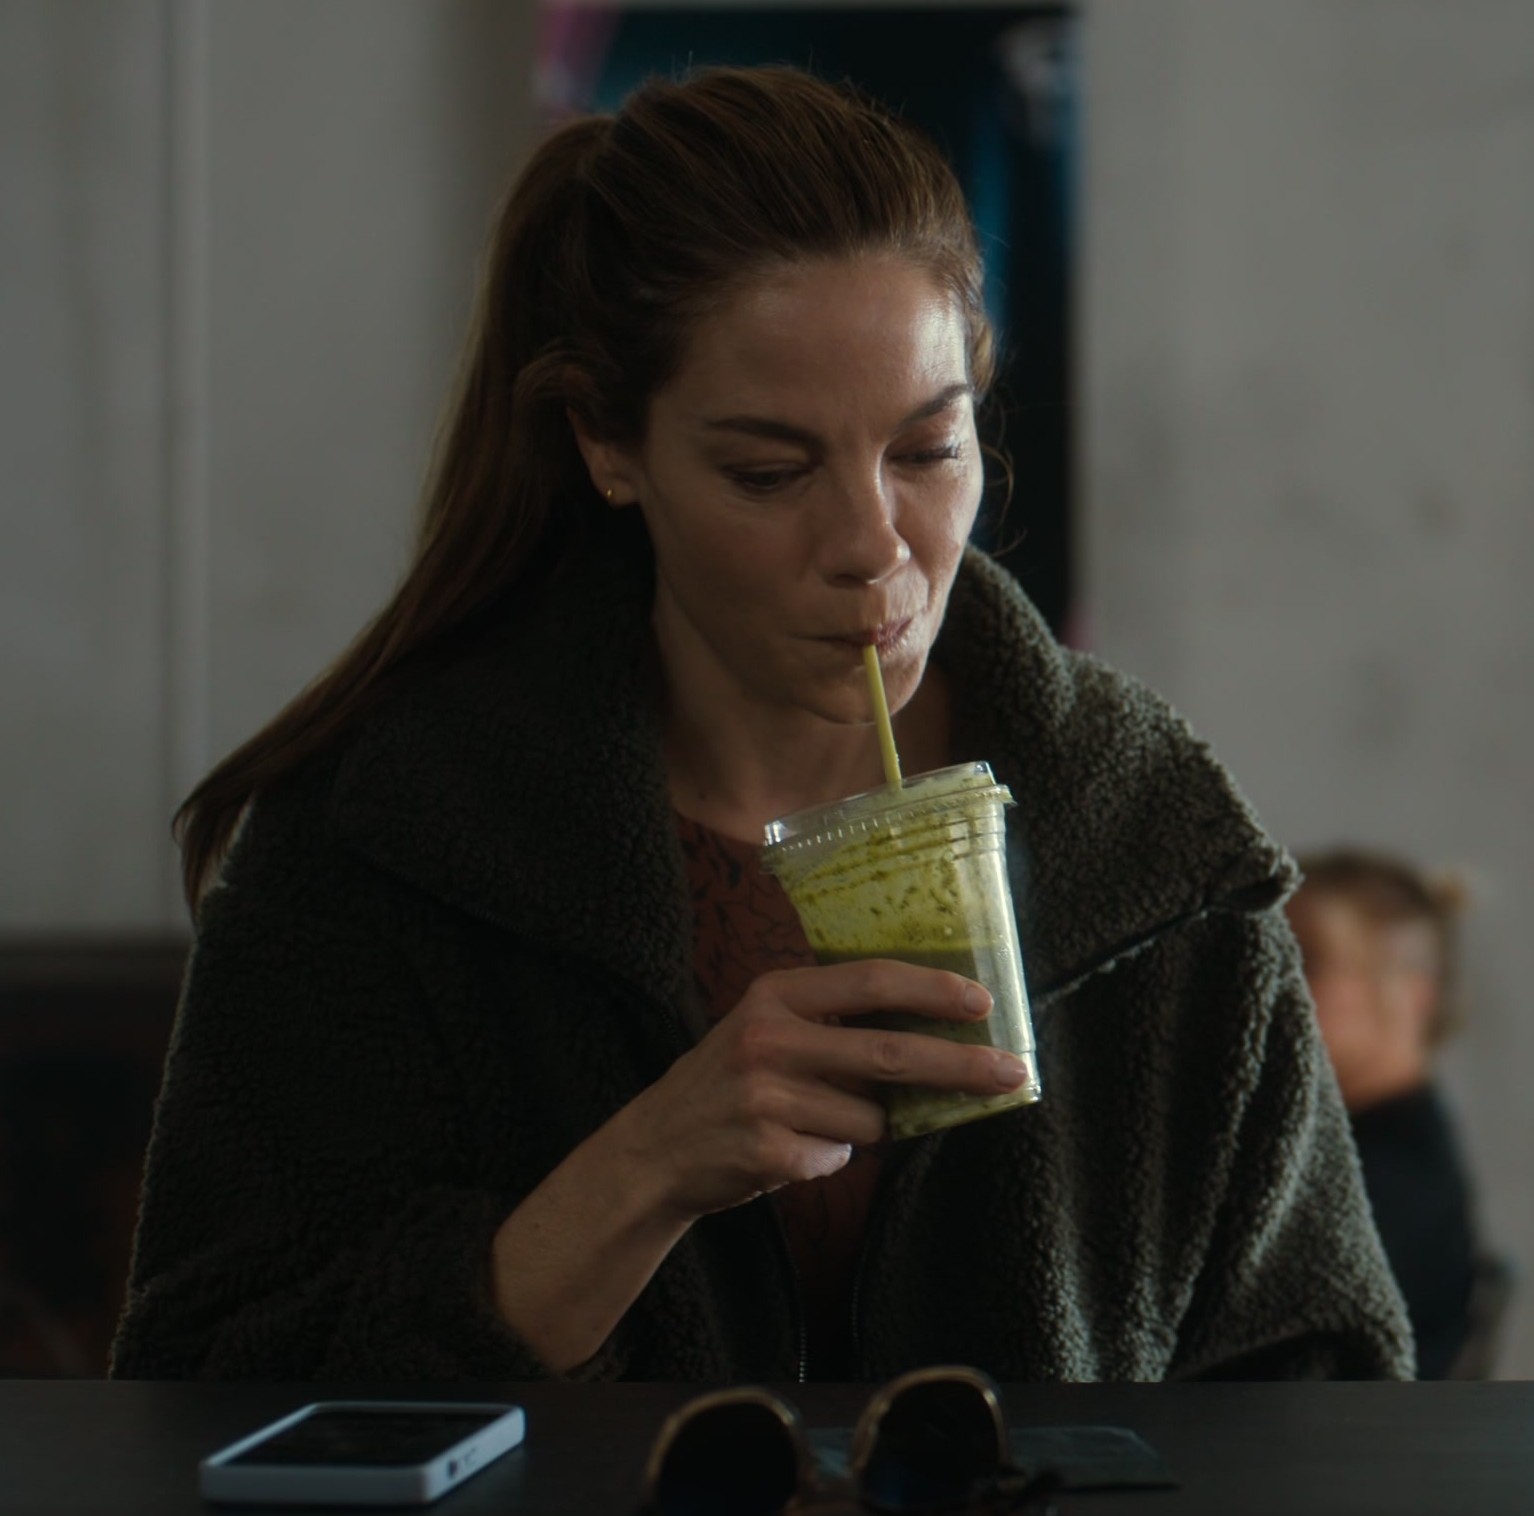 Worn on The Family Plan (2023) Movie - Green Teddy Jacket of Michelle Monaghan as Jessica Morgan